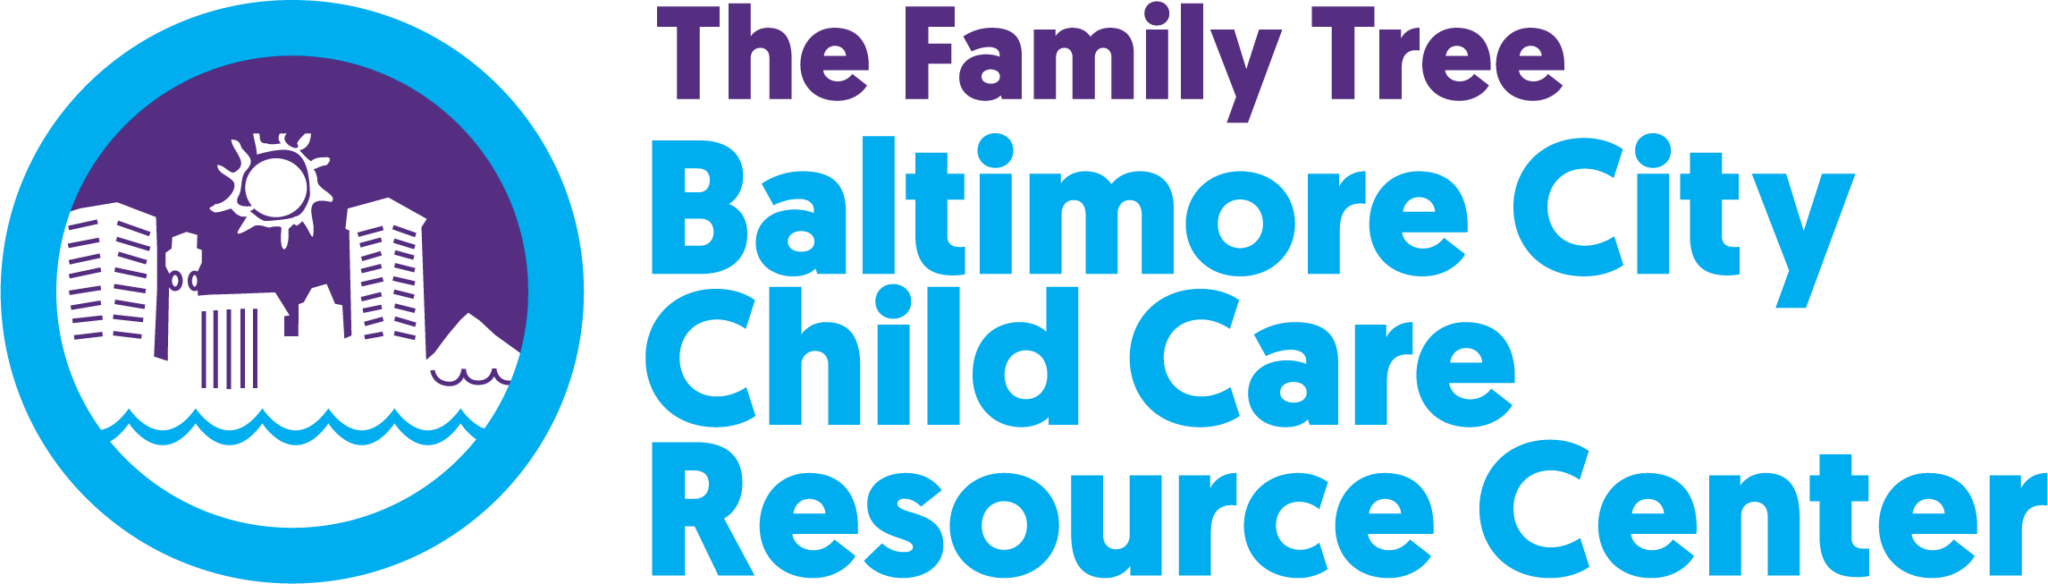 Baltimore City Child Care Resource Center The Family Tree